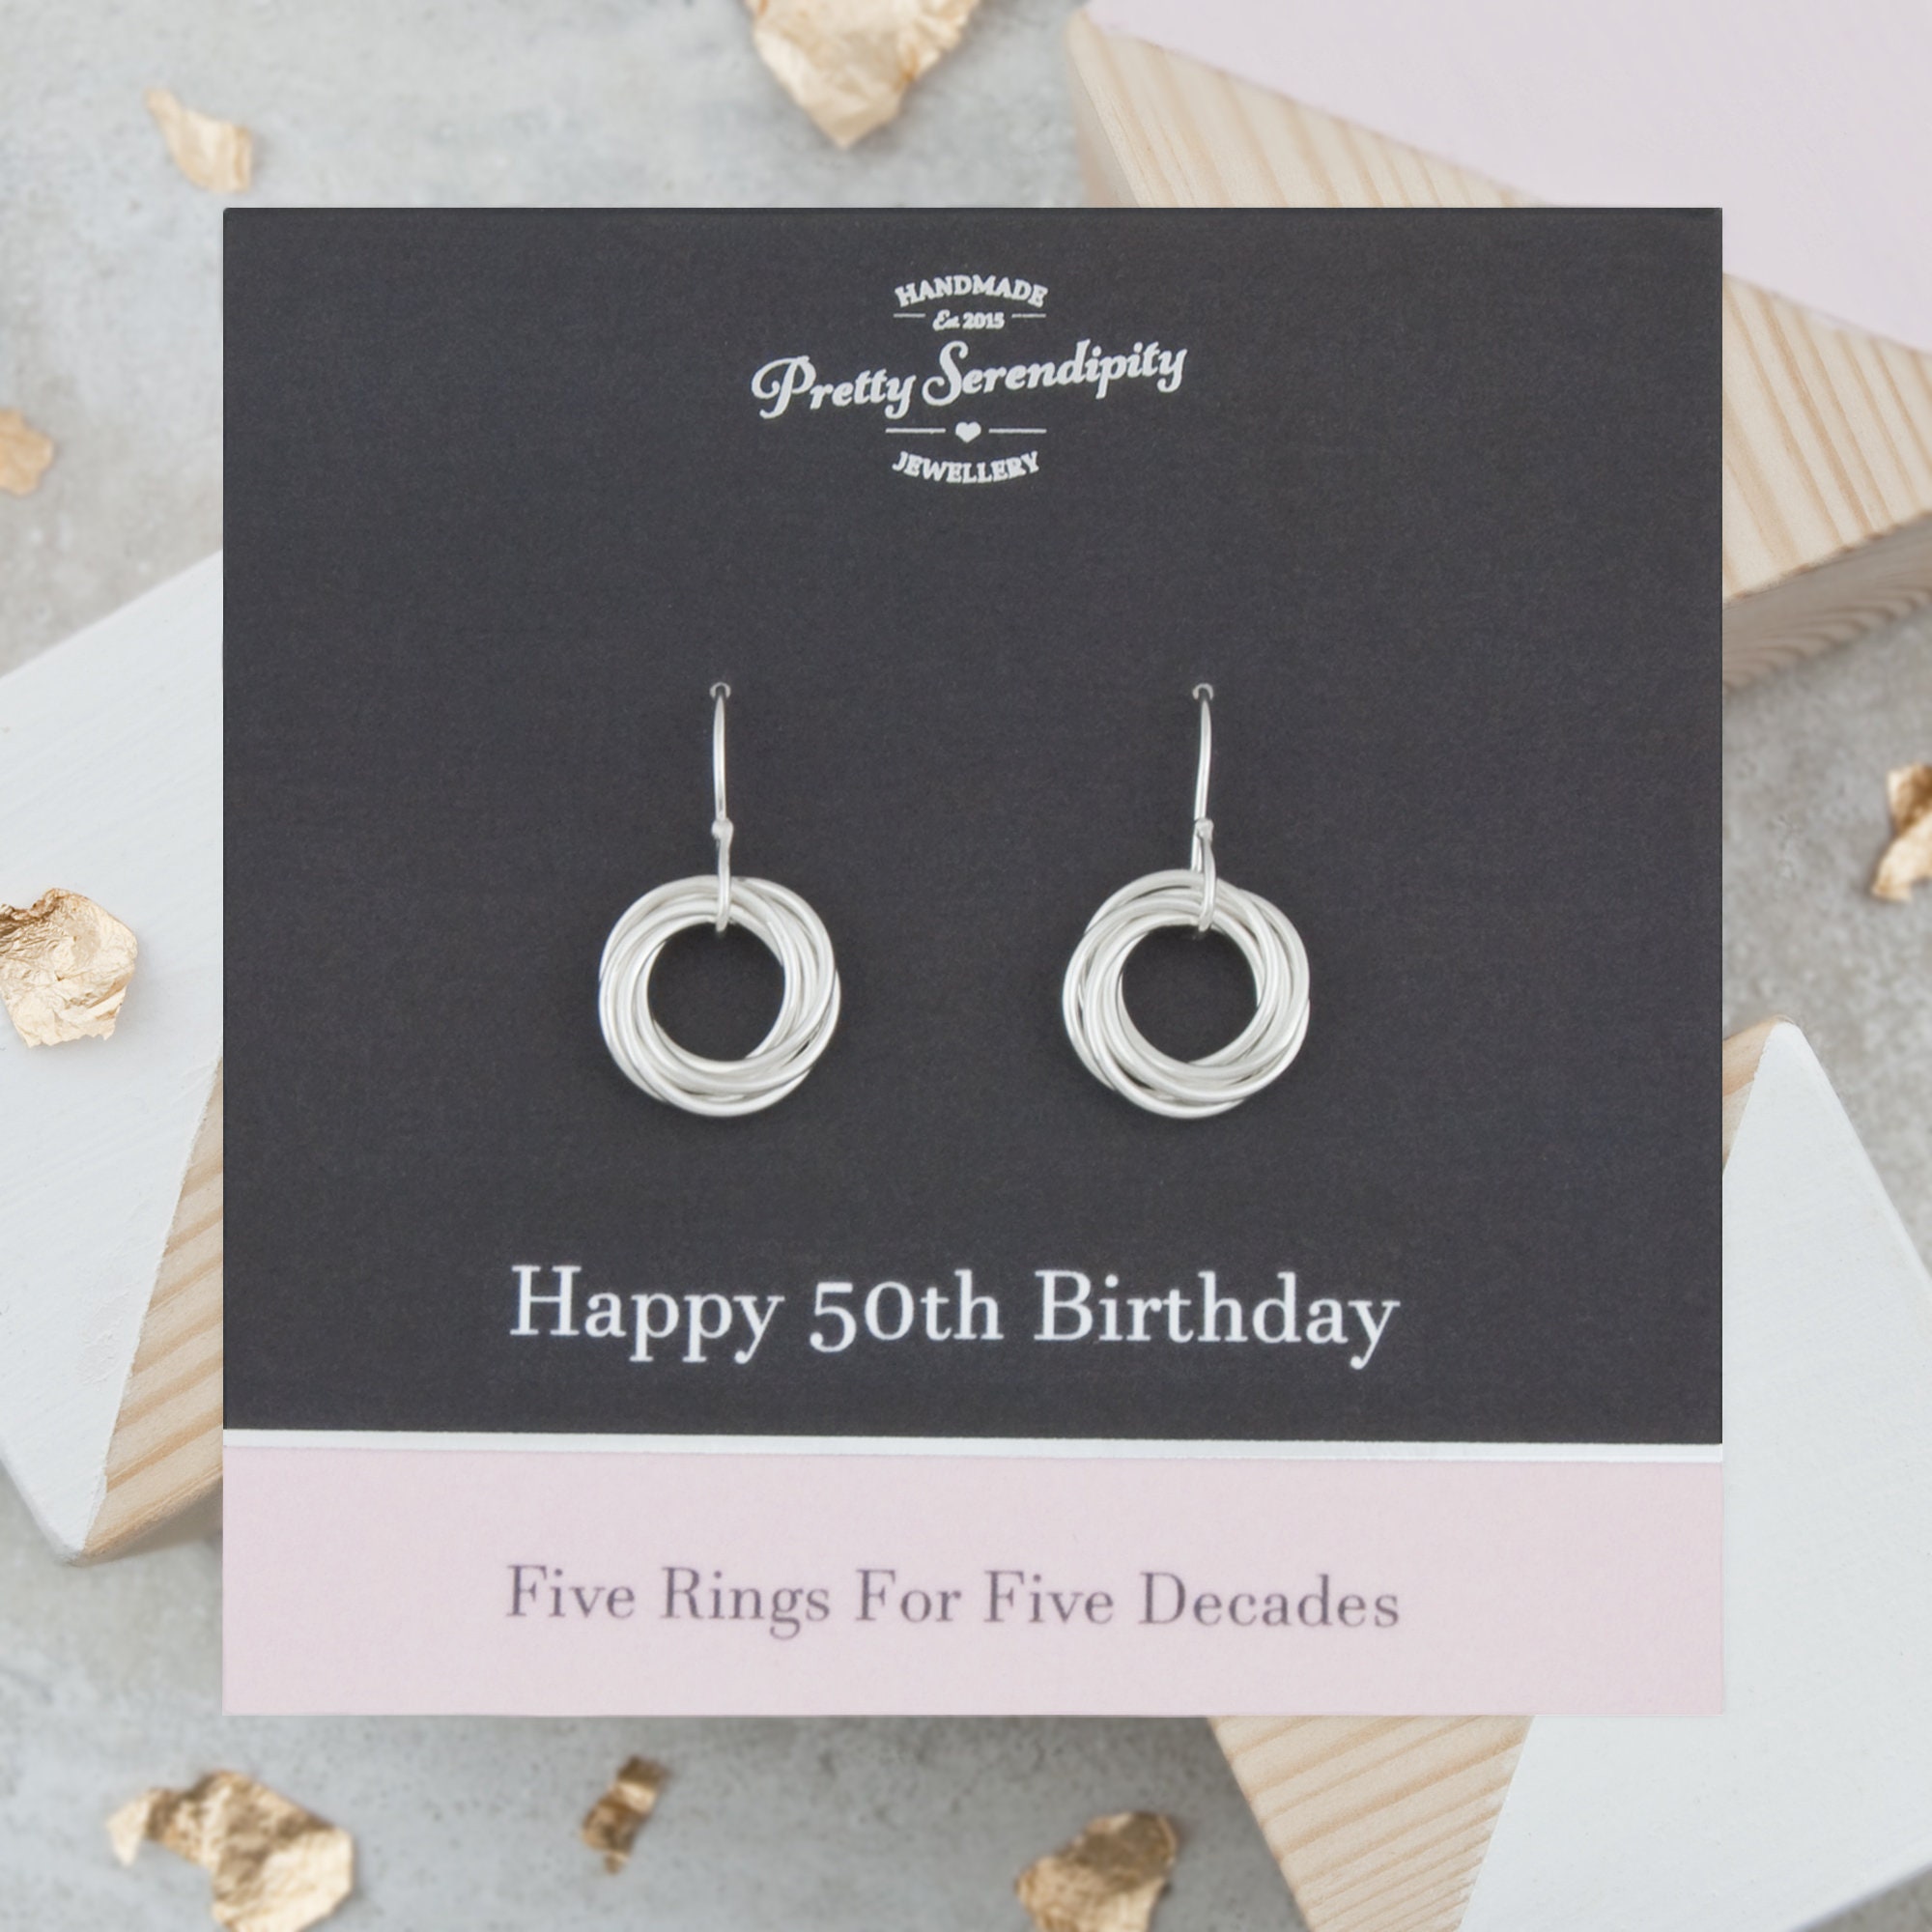 50Th Birthday Earrings, Gift, Jewellery, 5 Rings For Decades